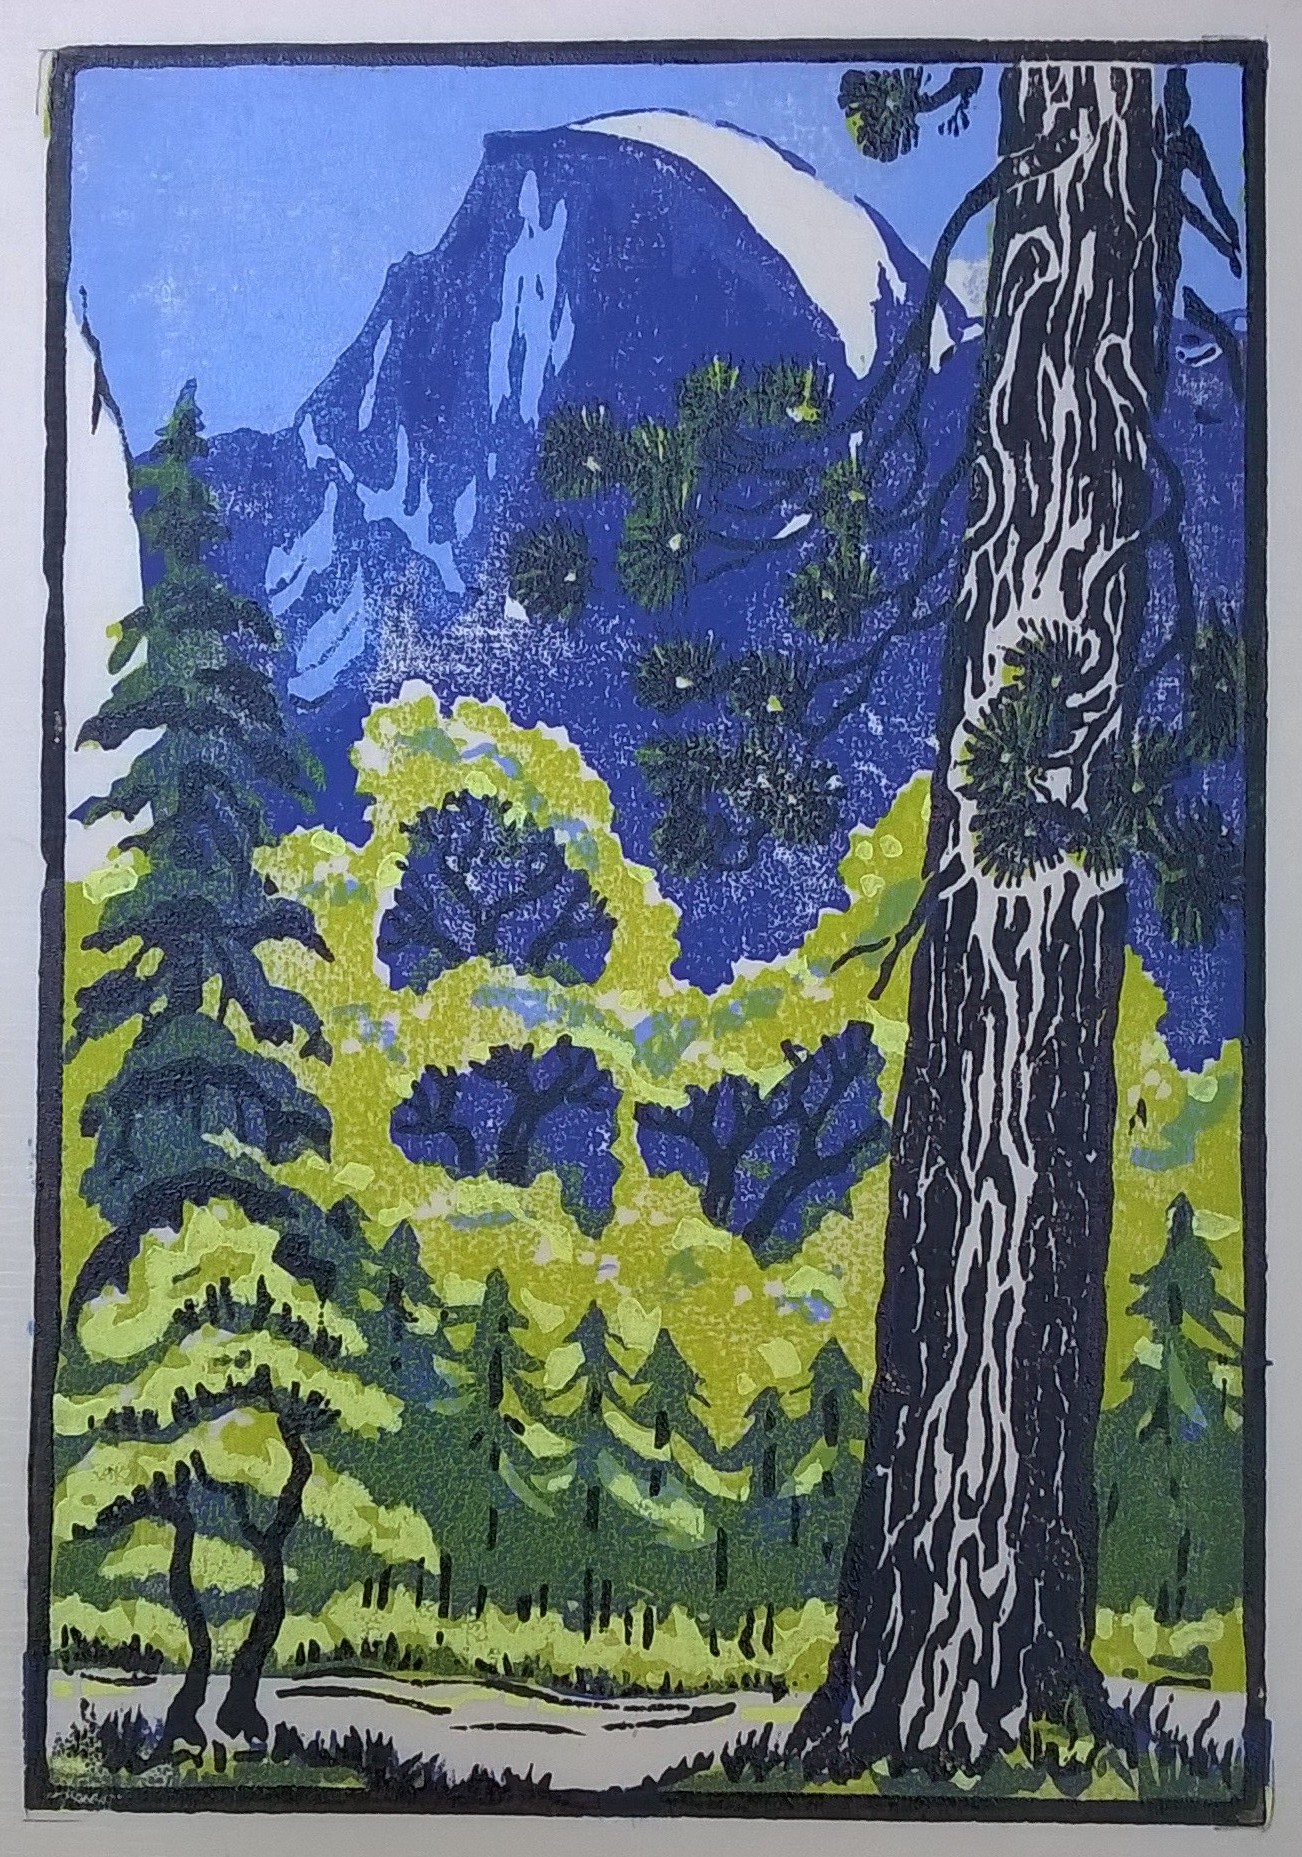 Half Dome Spring, Yosemite | Woodcut by Martino Hoss | Original blocks carved in 1928 by Della Taylor Hoss, 5.25 x 7.5 in | $250